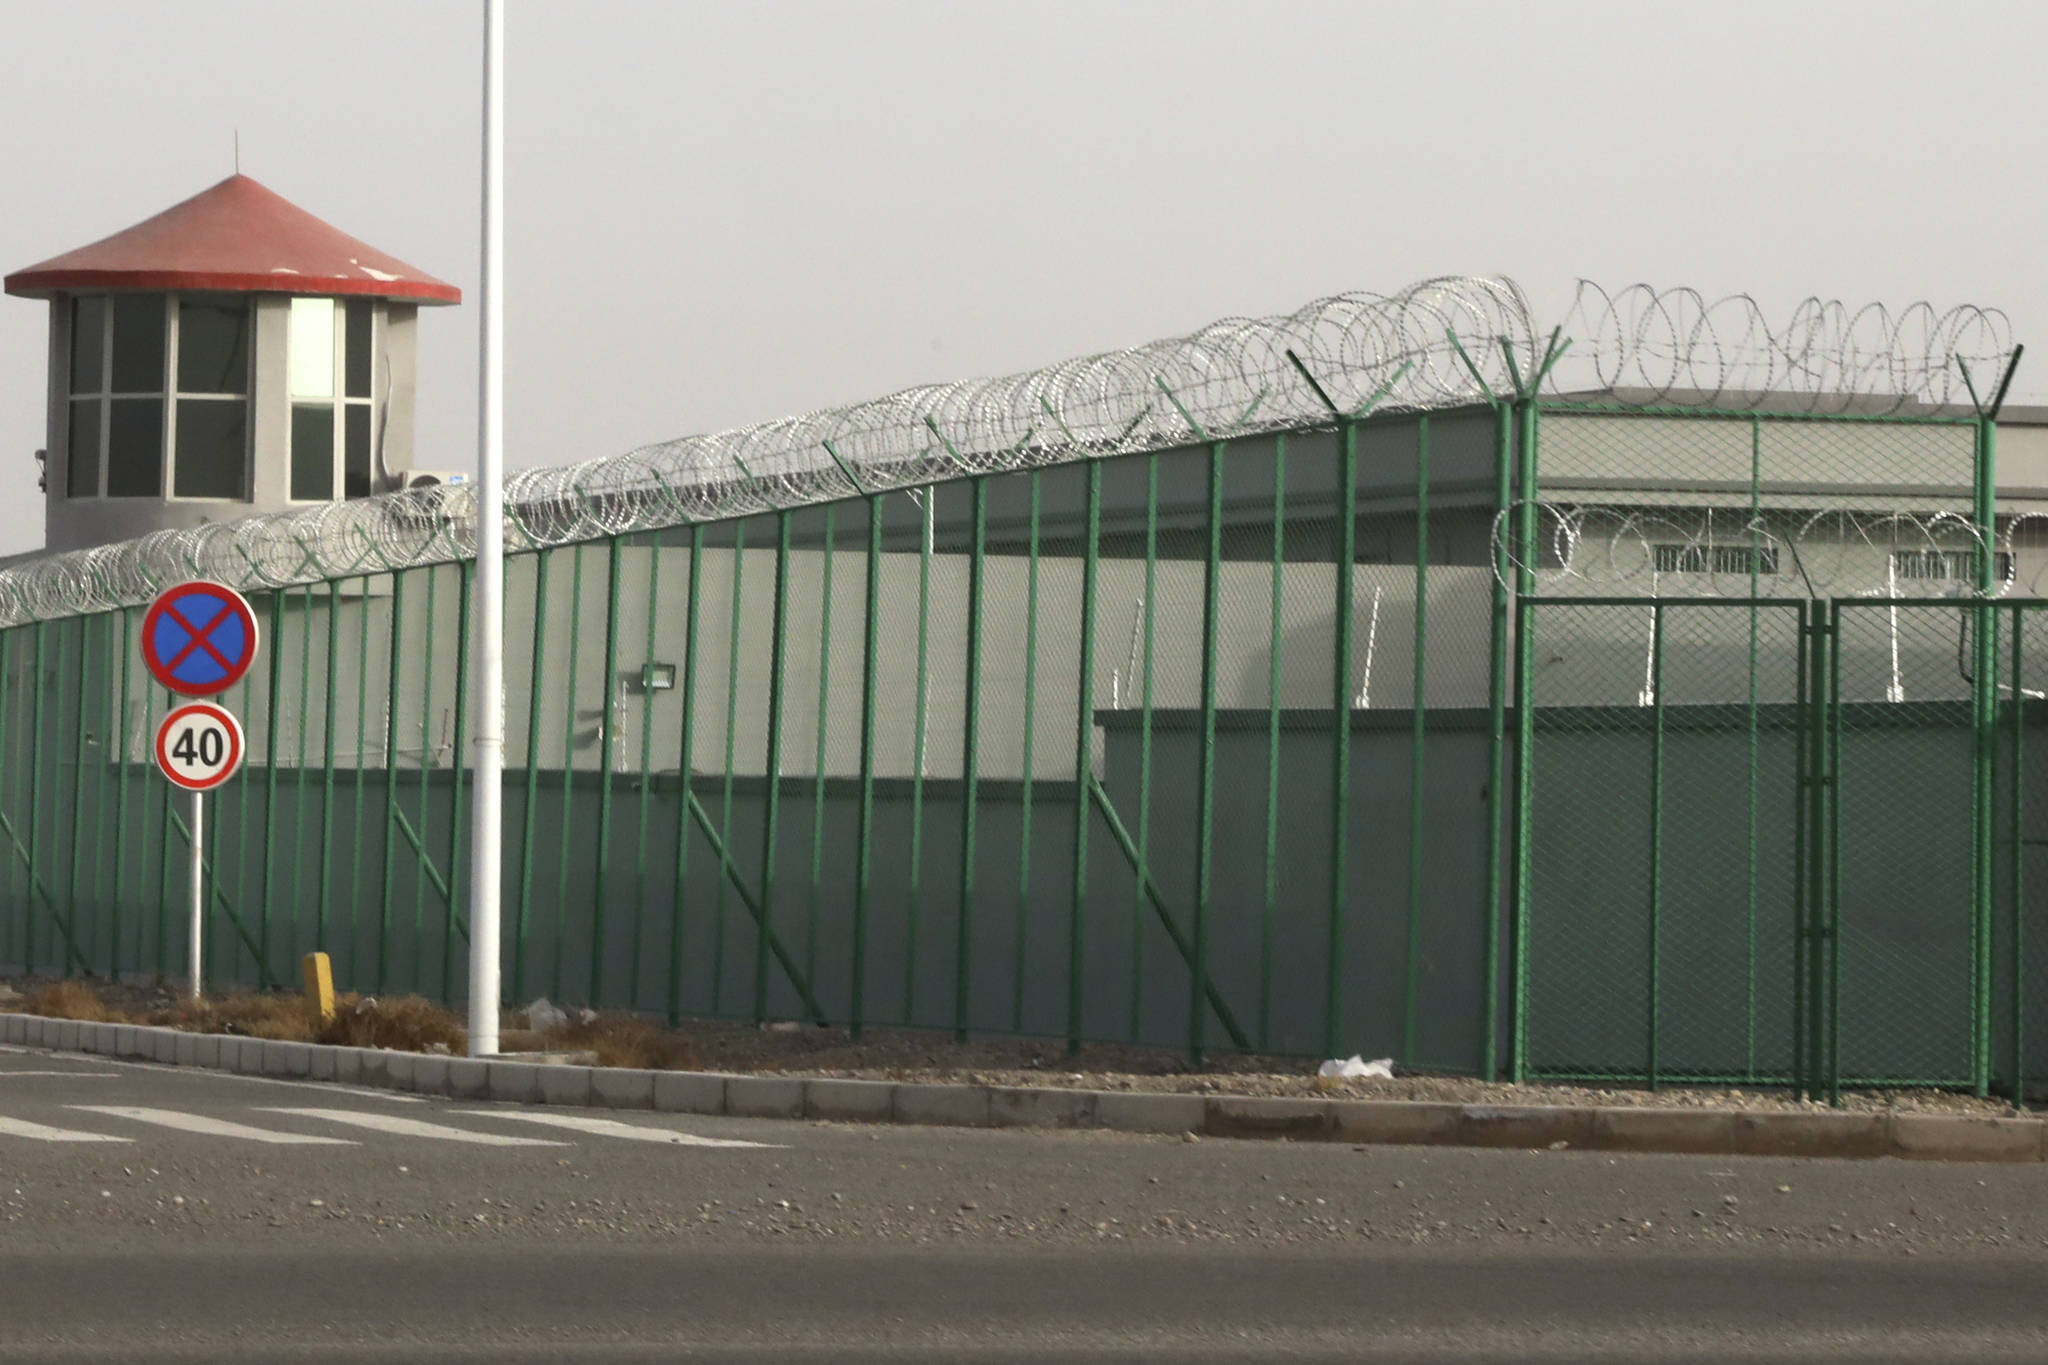 In this Monday, Dec. 3, 2018, photo, a guard tower and barbed wire fences are seen around a facility in the Kunshan Industrial Park in Artux in western China’s Xinjiang region. (AP Photo/Ng Han Guan)